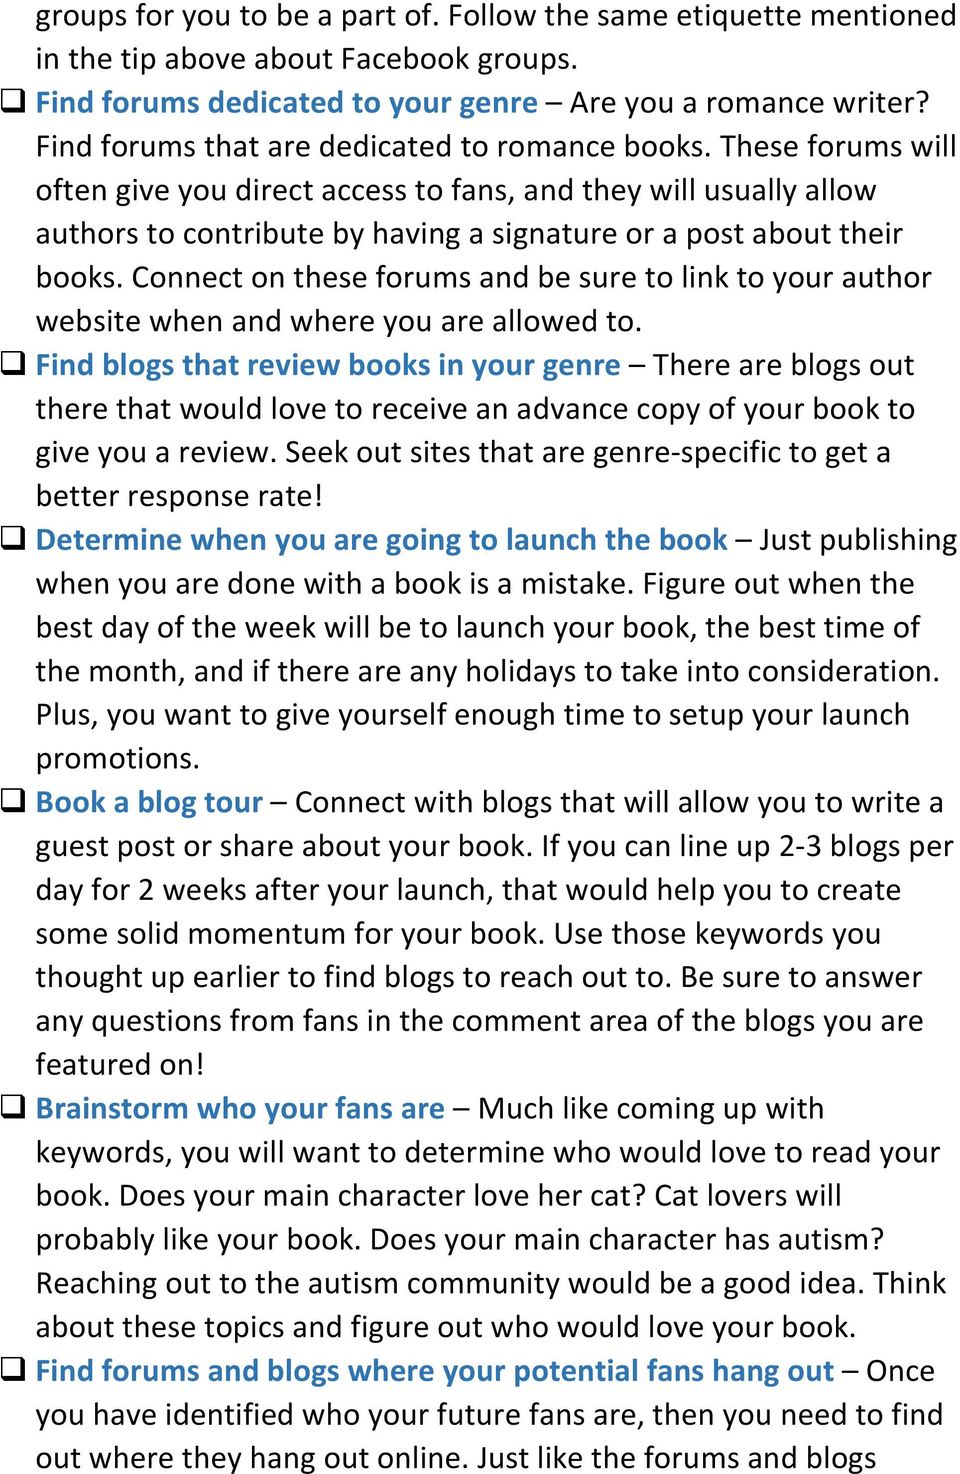 These forums will often give you direct access to fans, and they will usually allow authors to contribute by having a signature or a post about their books.